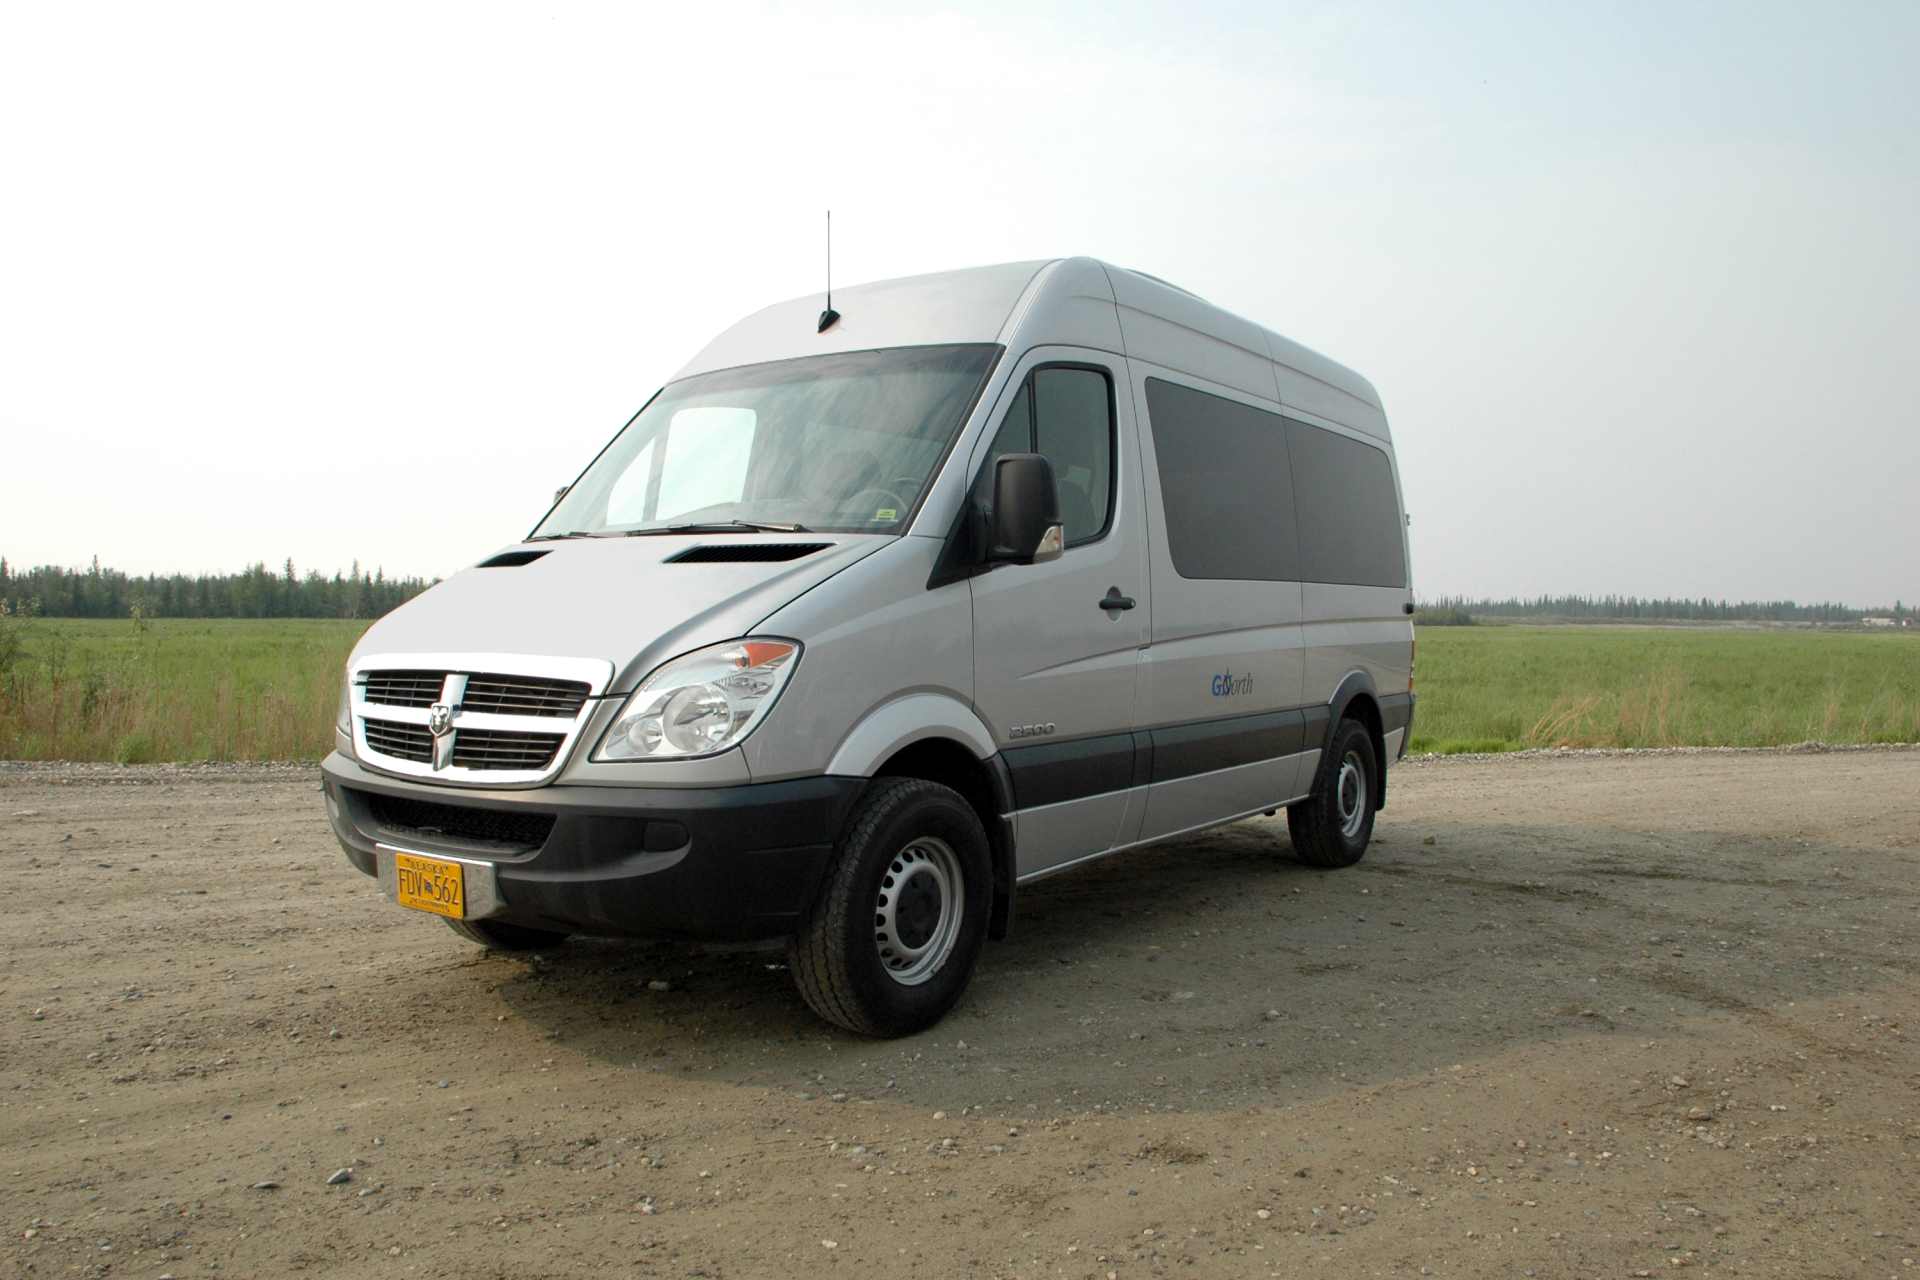 lateral view of a grey passenger van during daylight on a gravel road and a green plain in the background